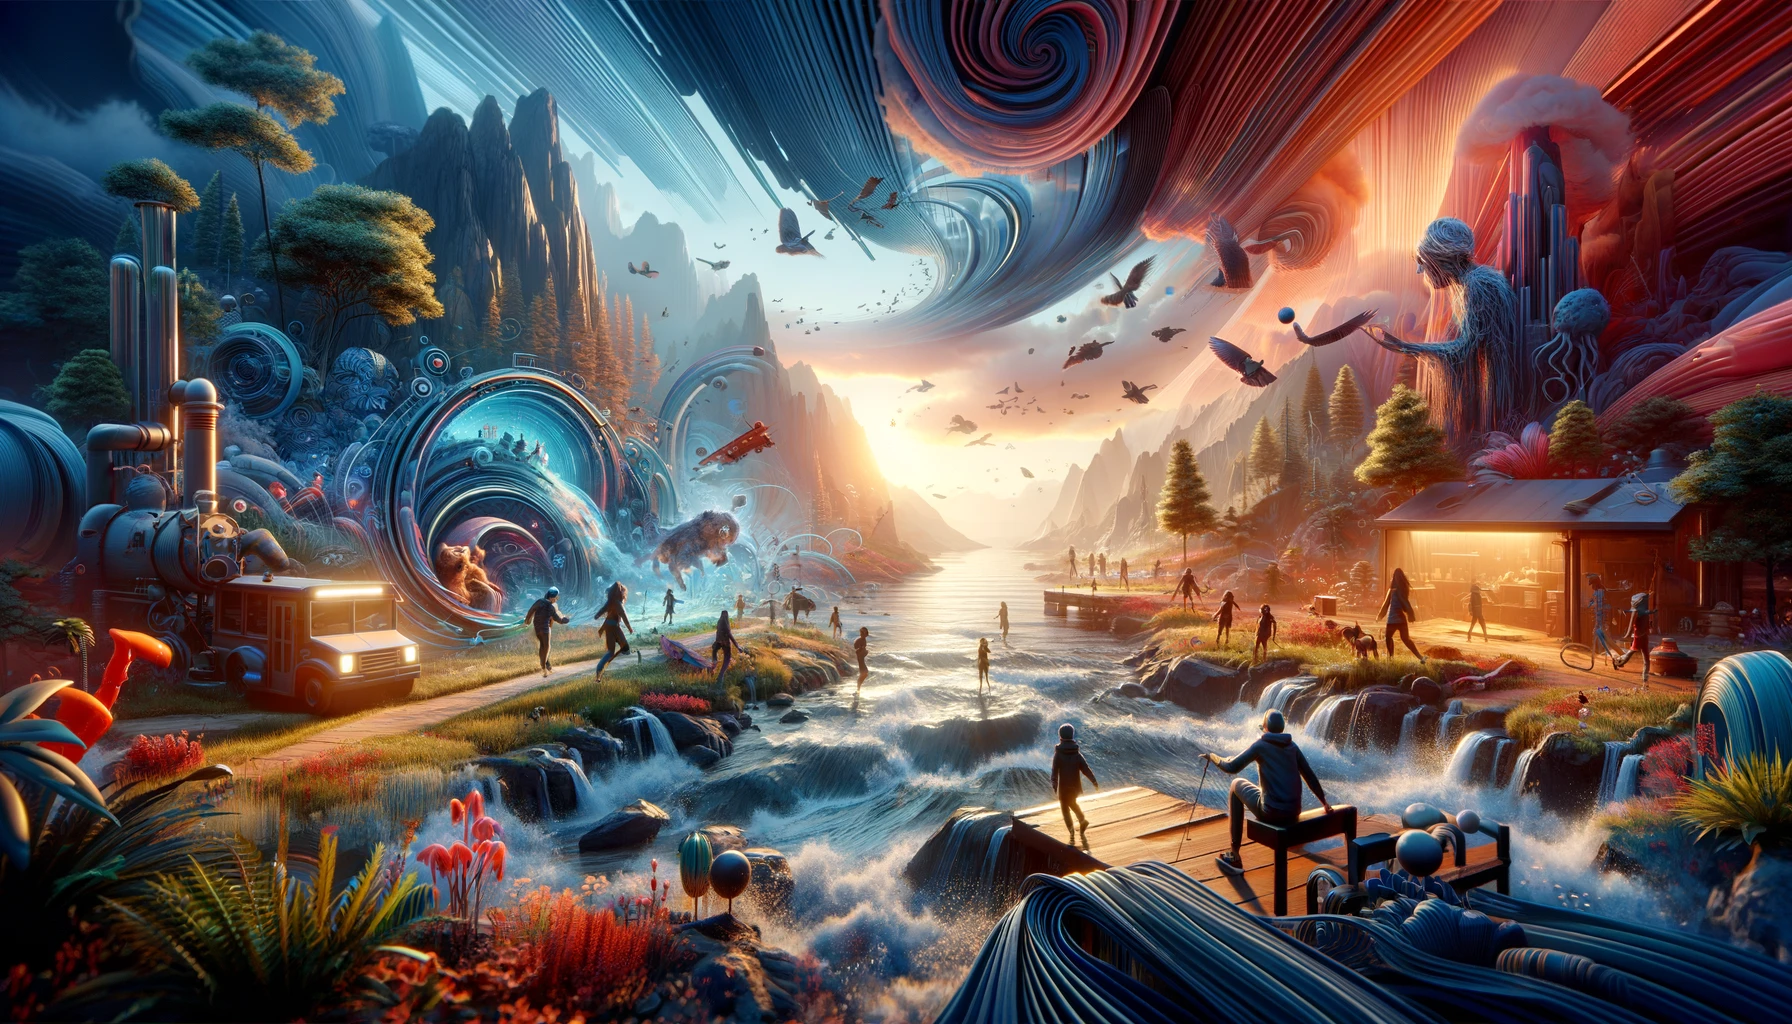 Vibrant 3D narrative scene with characters and dynamic environments, showcasing movement, emotion, and choice, inviting viewers to immerse themselves in the interactive storytelling experience.